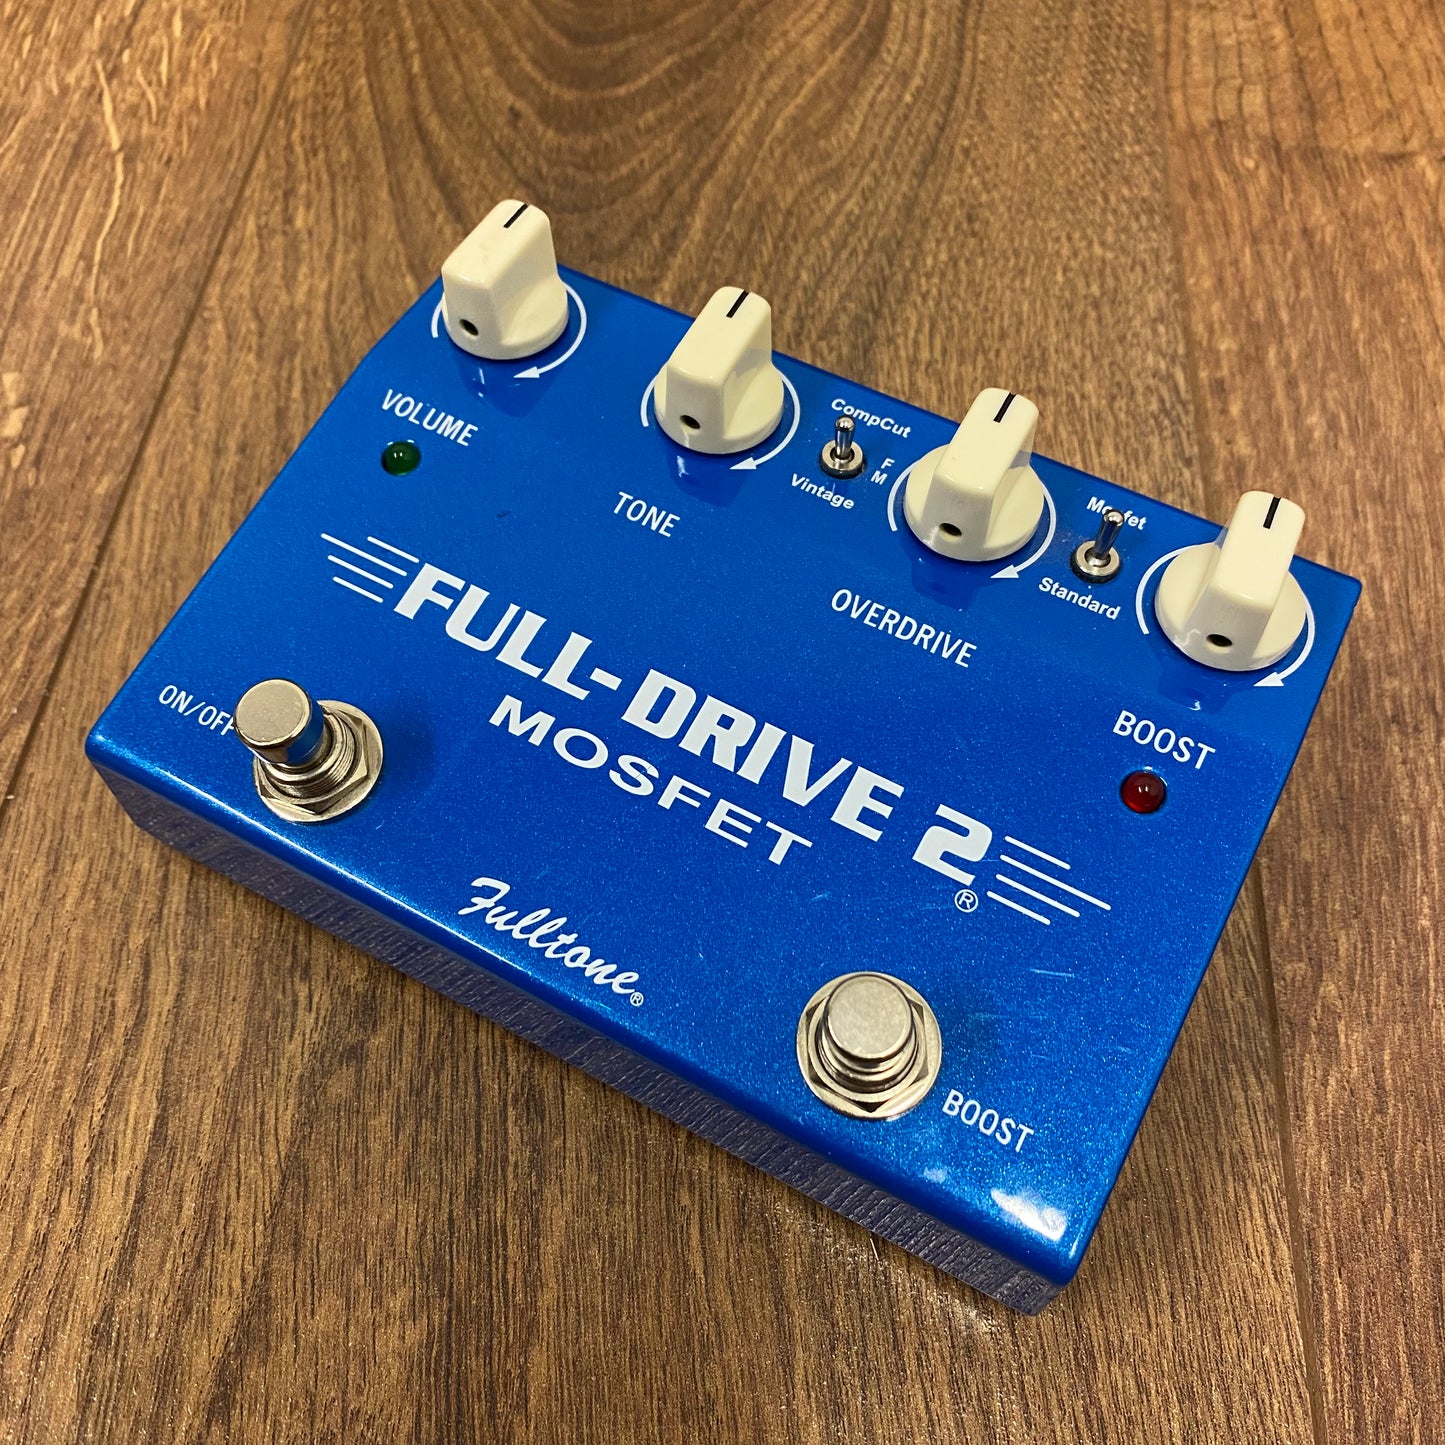 Pre-Owned Fulltone Full-Drive 2 Mosfet Overdrive Pedal